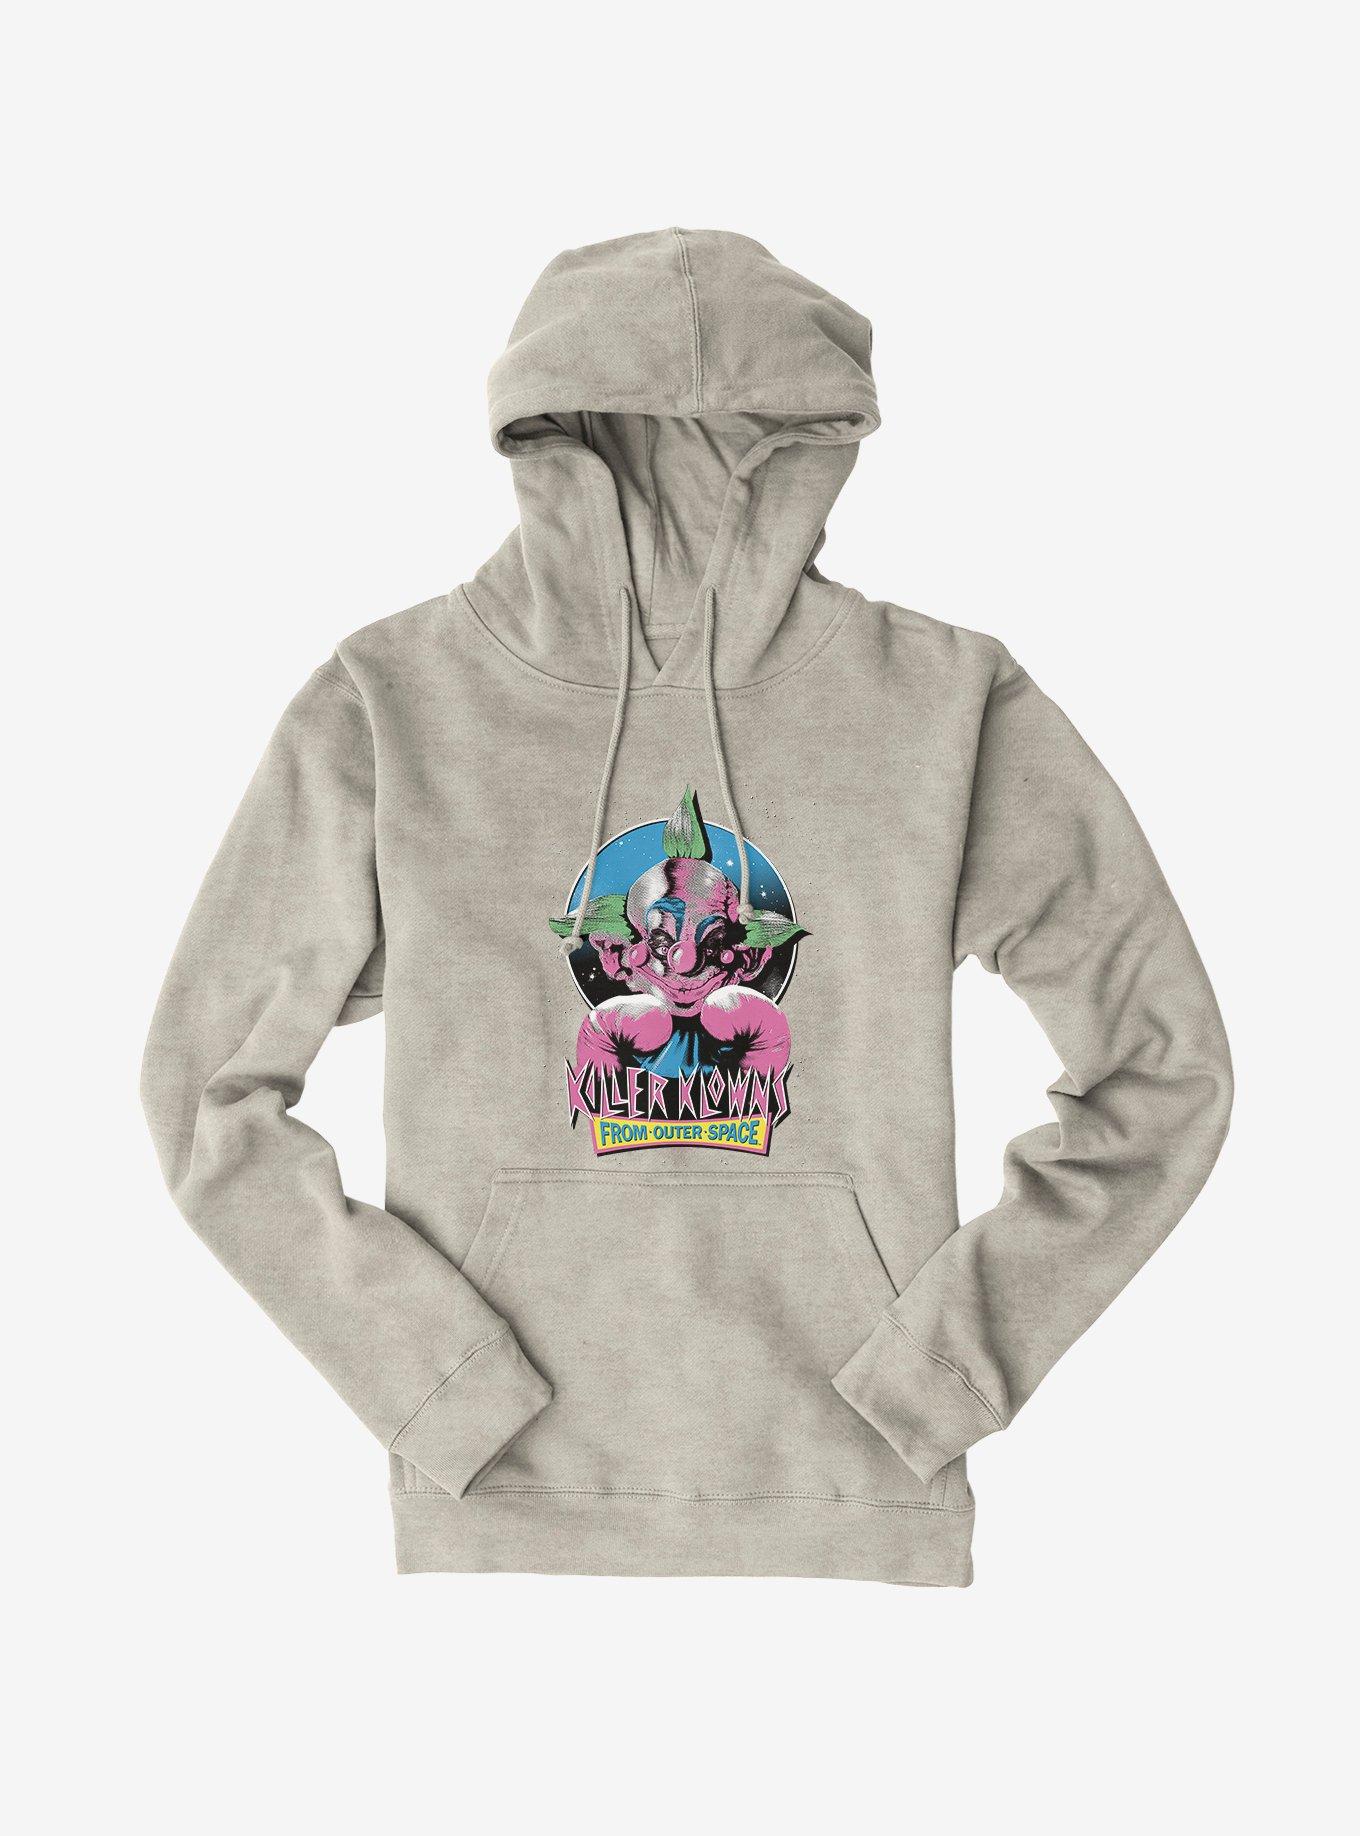 Killer Klowns From Outer Space Shorty Hoodie, OATMEAL HEATHER, hi-res